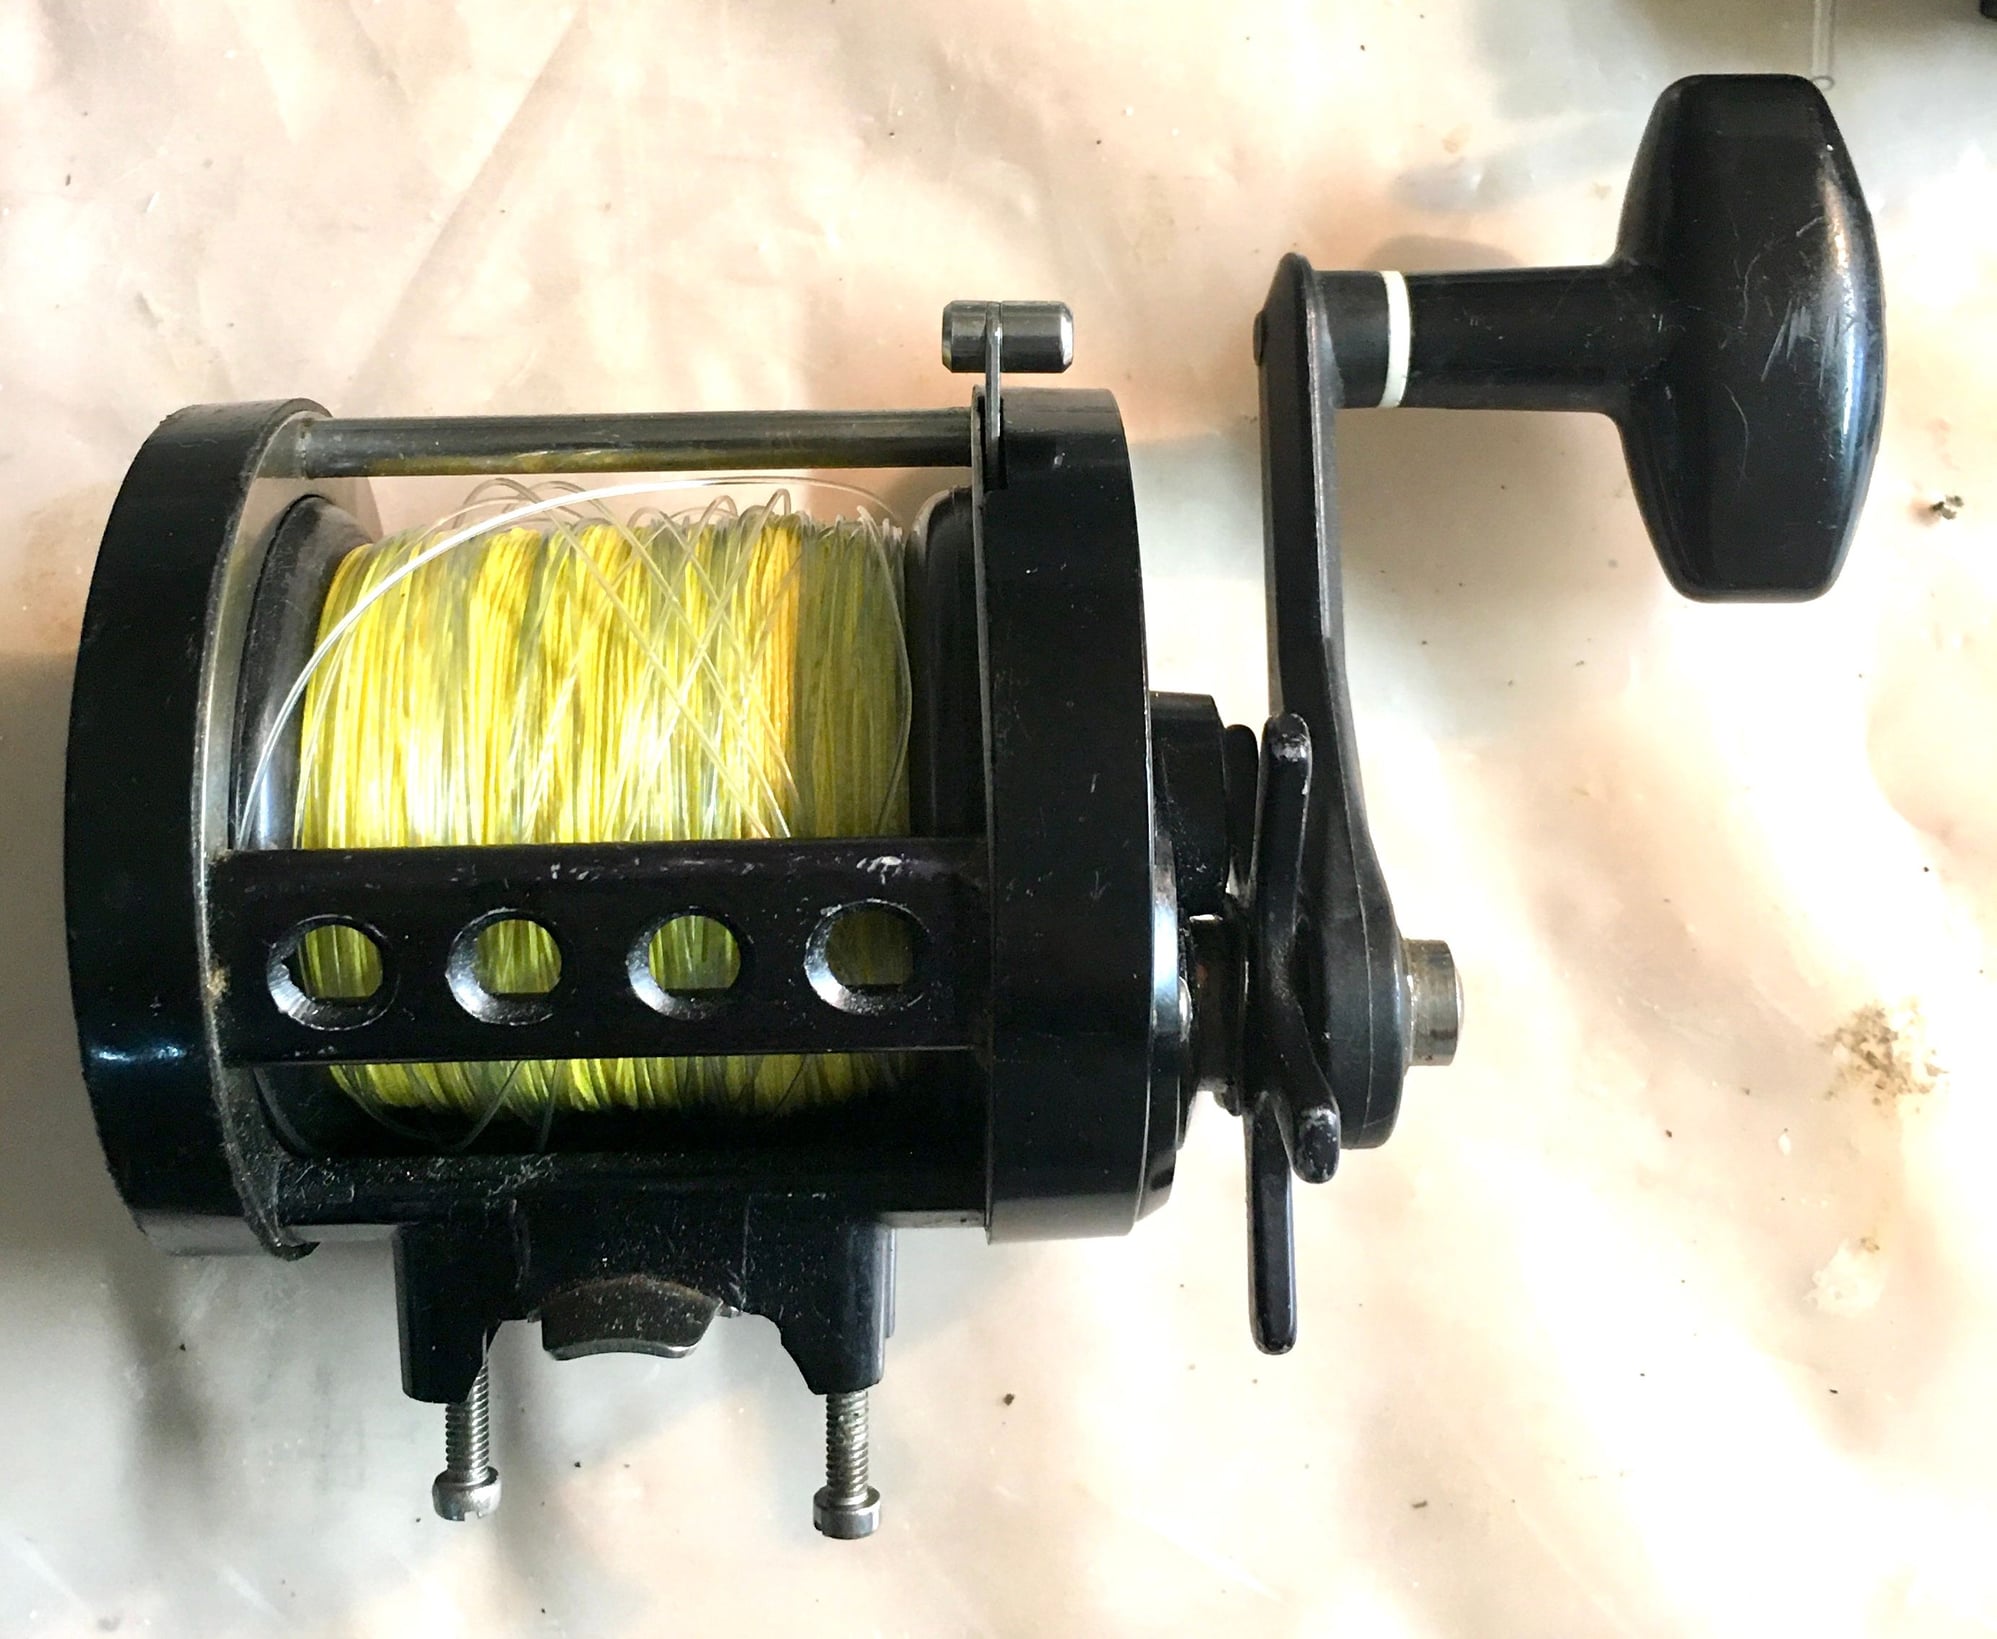 International - Looking for clear Newell reel 220